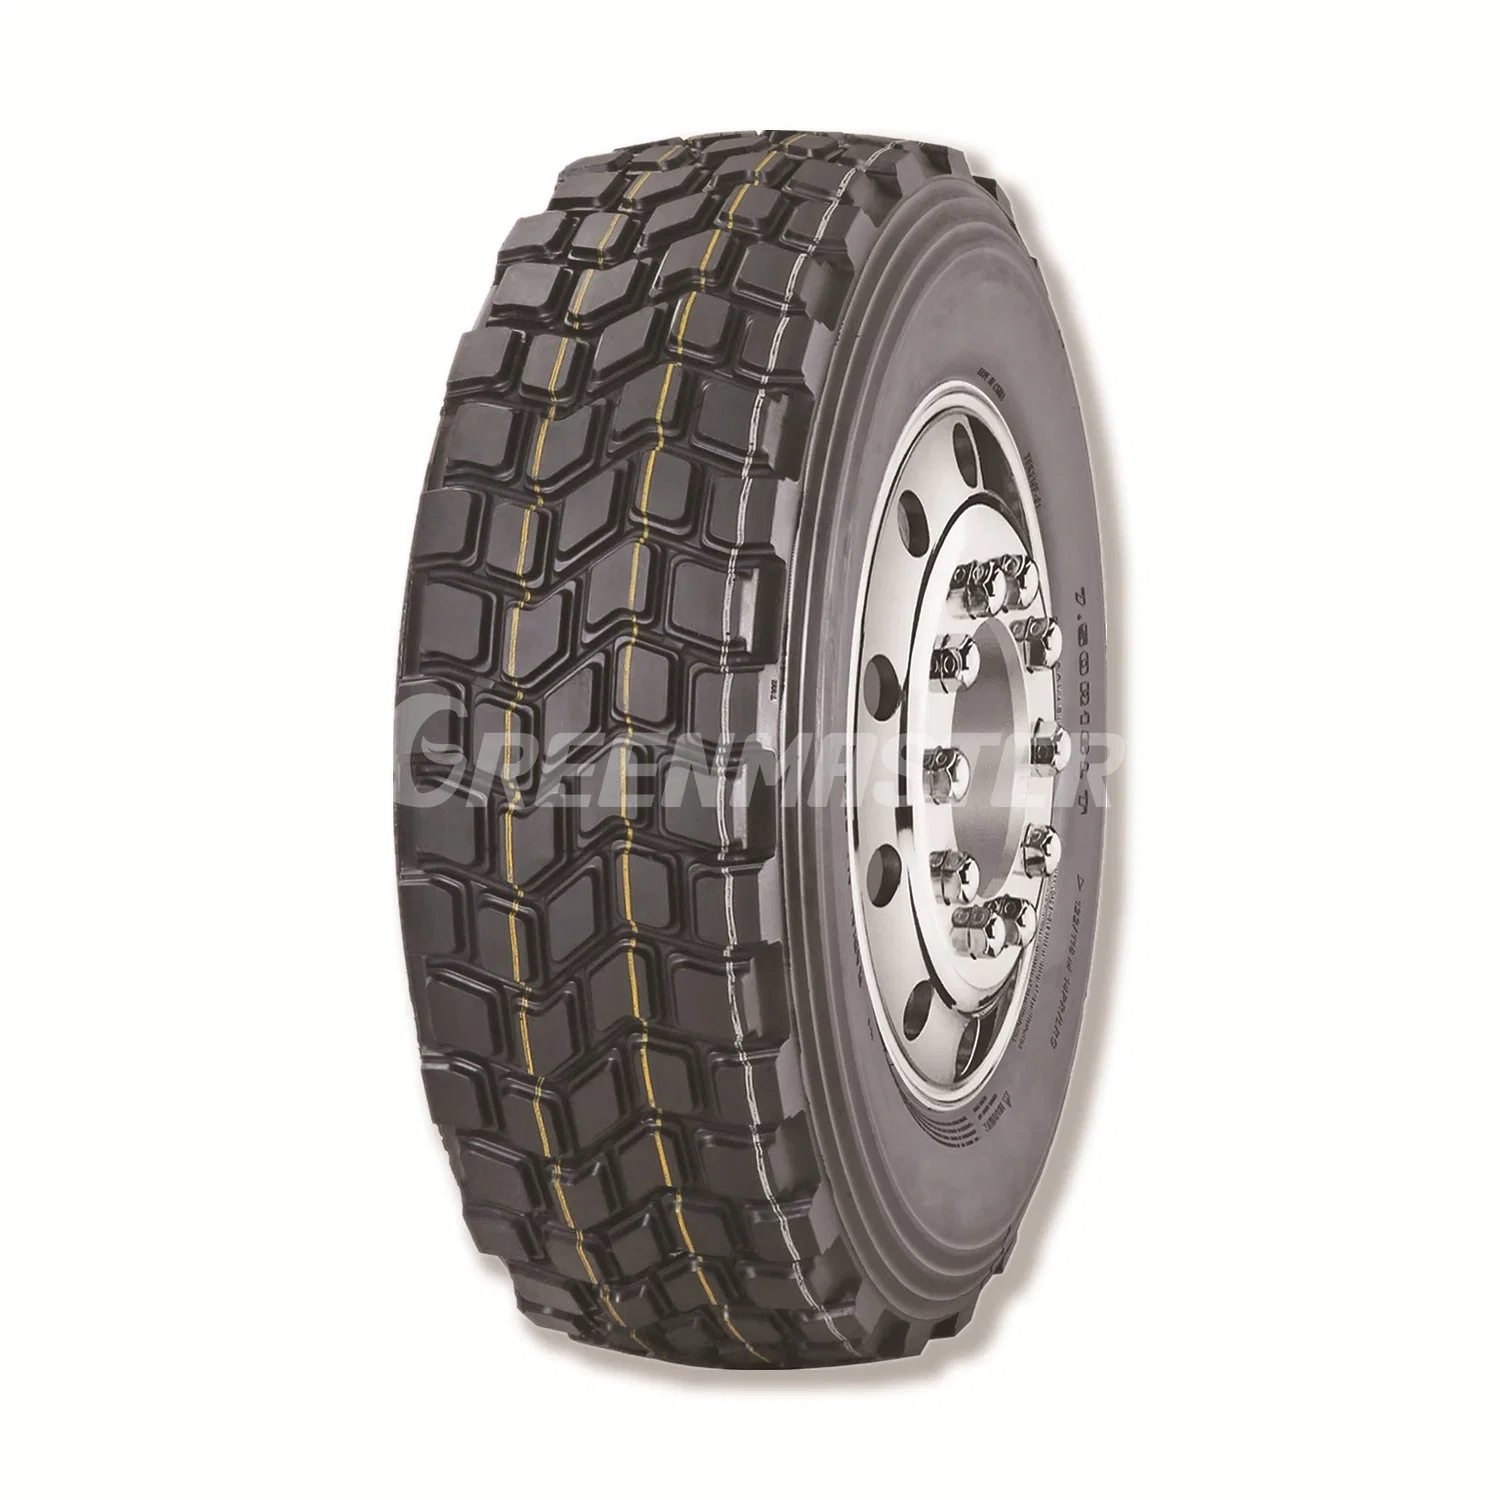 China Factory Wholesale Best Price Radial Country-Cross Tire, off-The-Road Dunlop Design Sand Grip Tyres, Desert Truck Tyre 7.50r16 14.00r20 for Sale